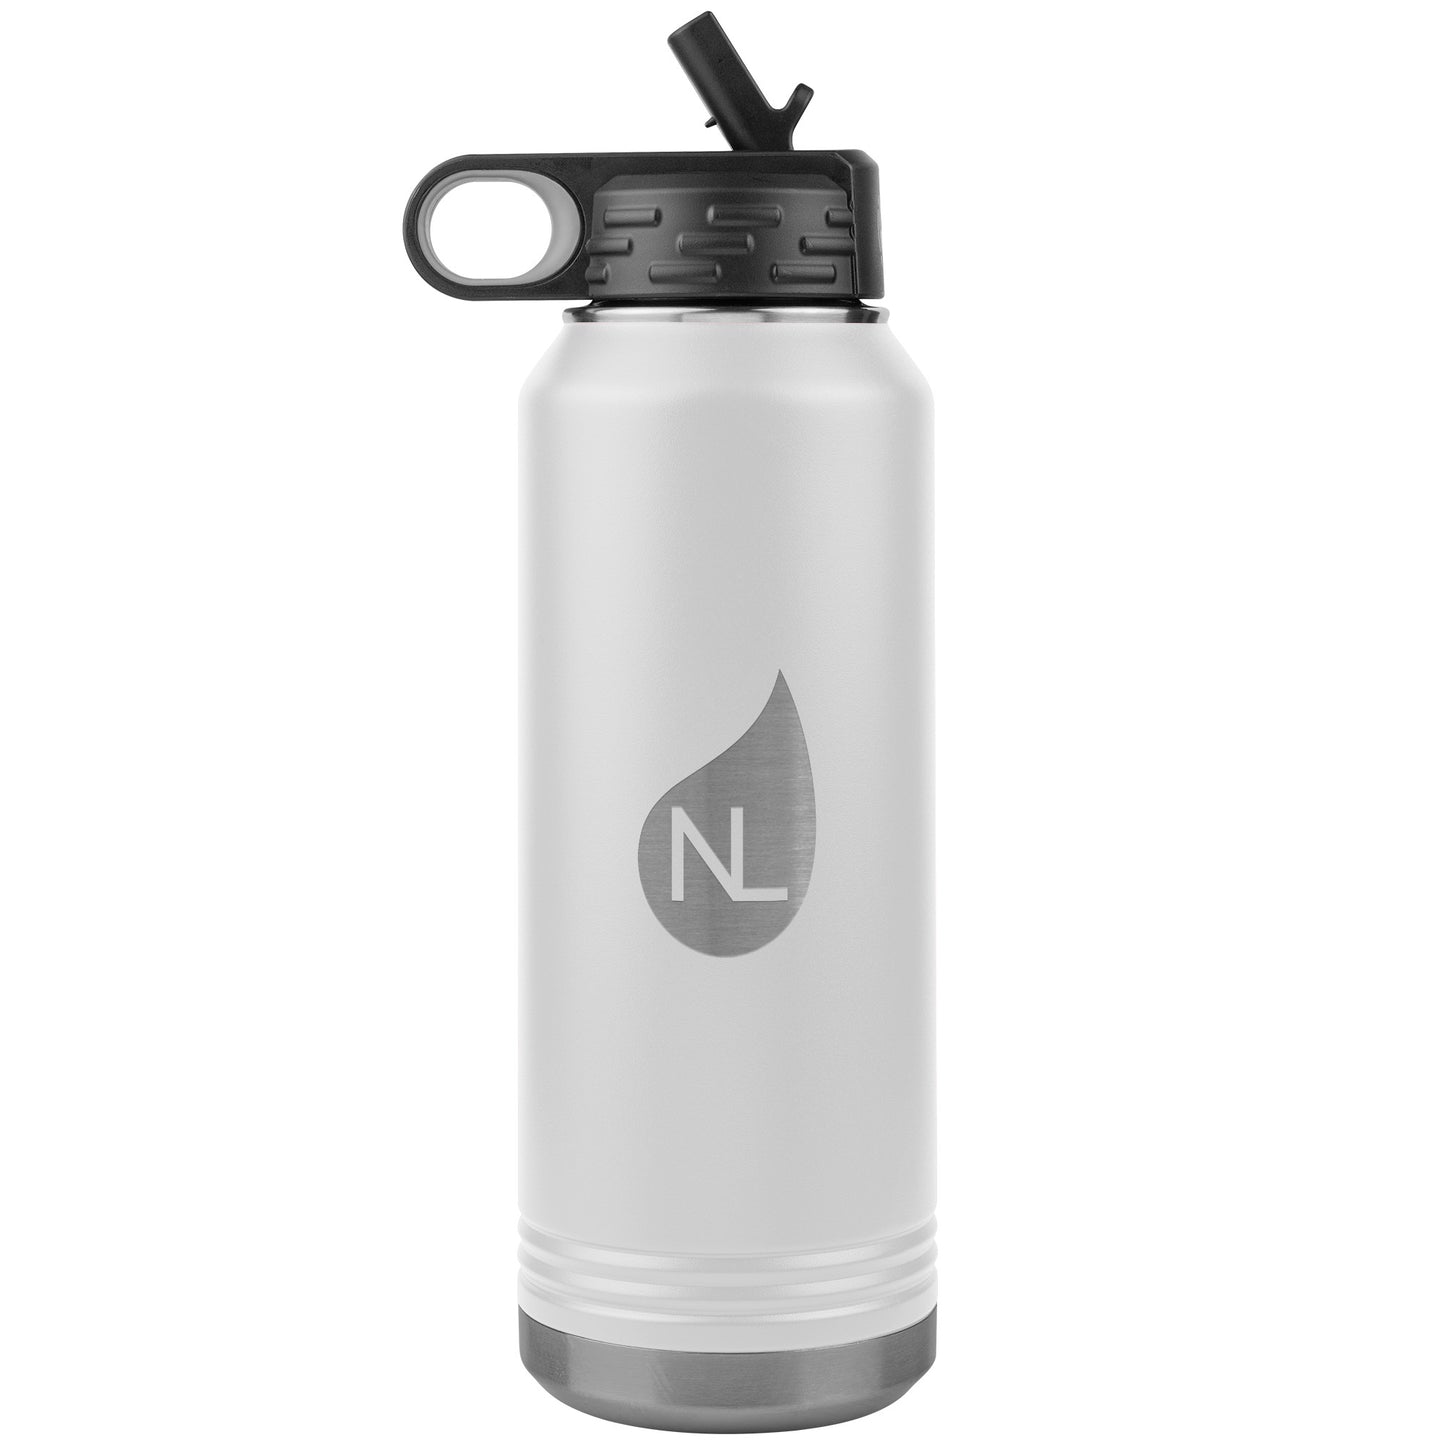 NL ICON Insulated Water Bottle